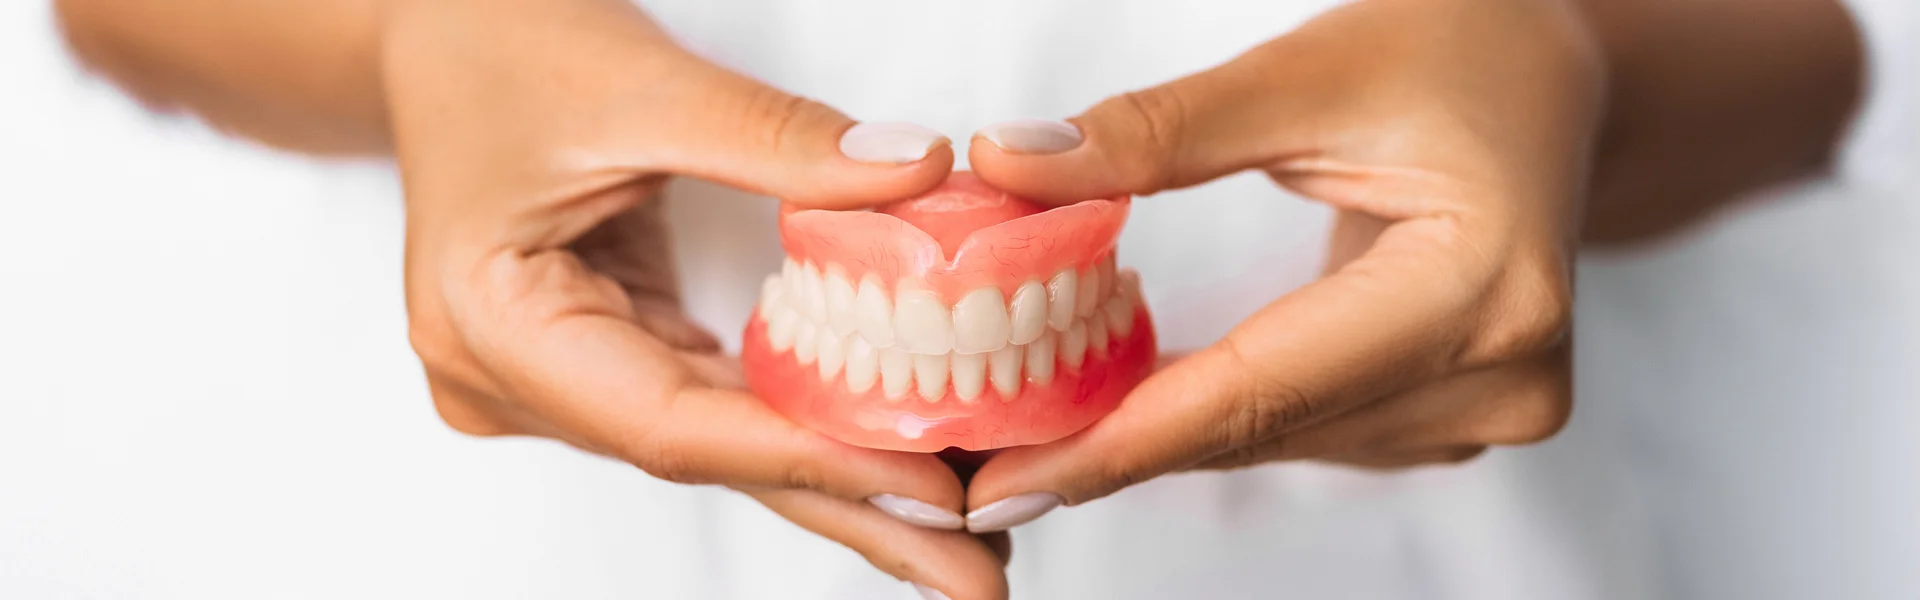 Types of Partial Dentures for Front Teeth